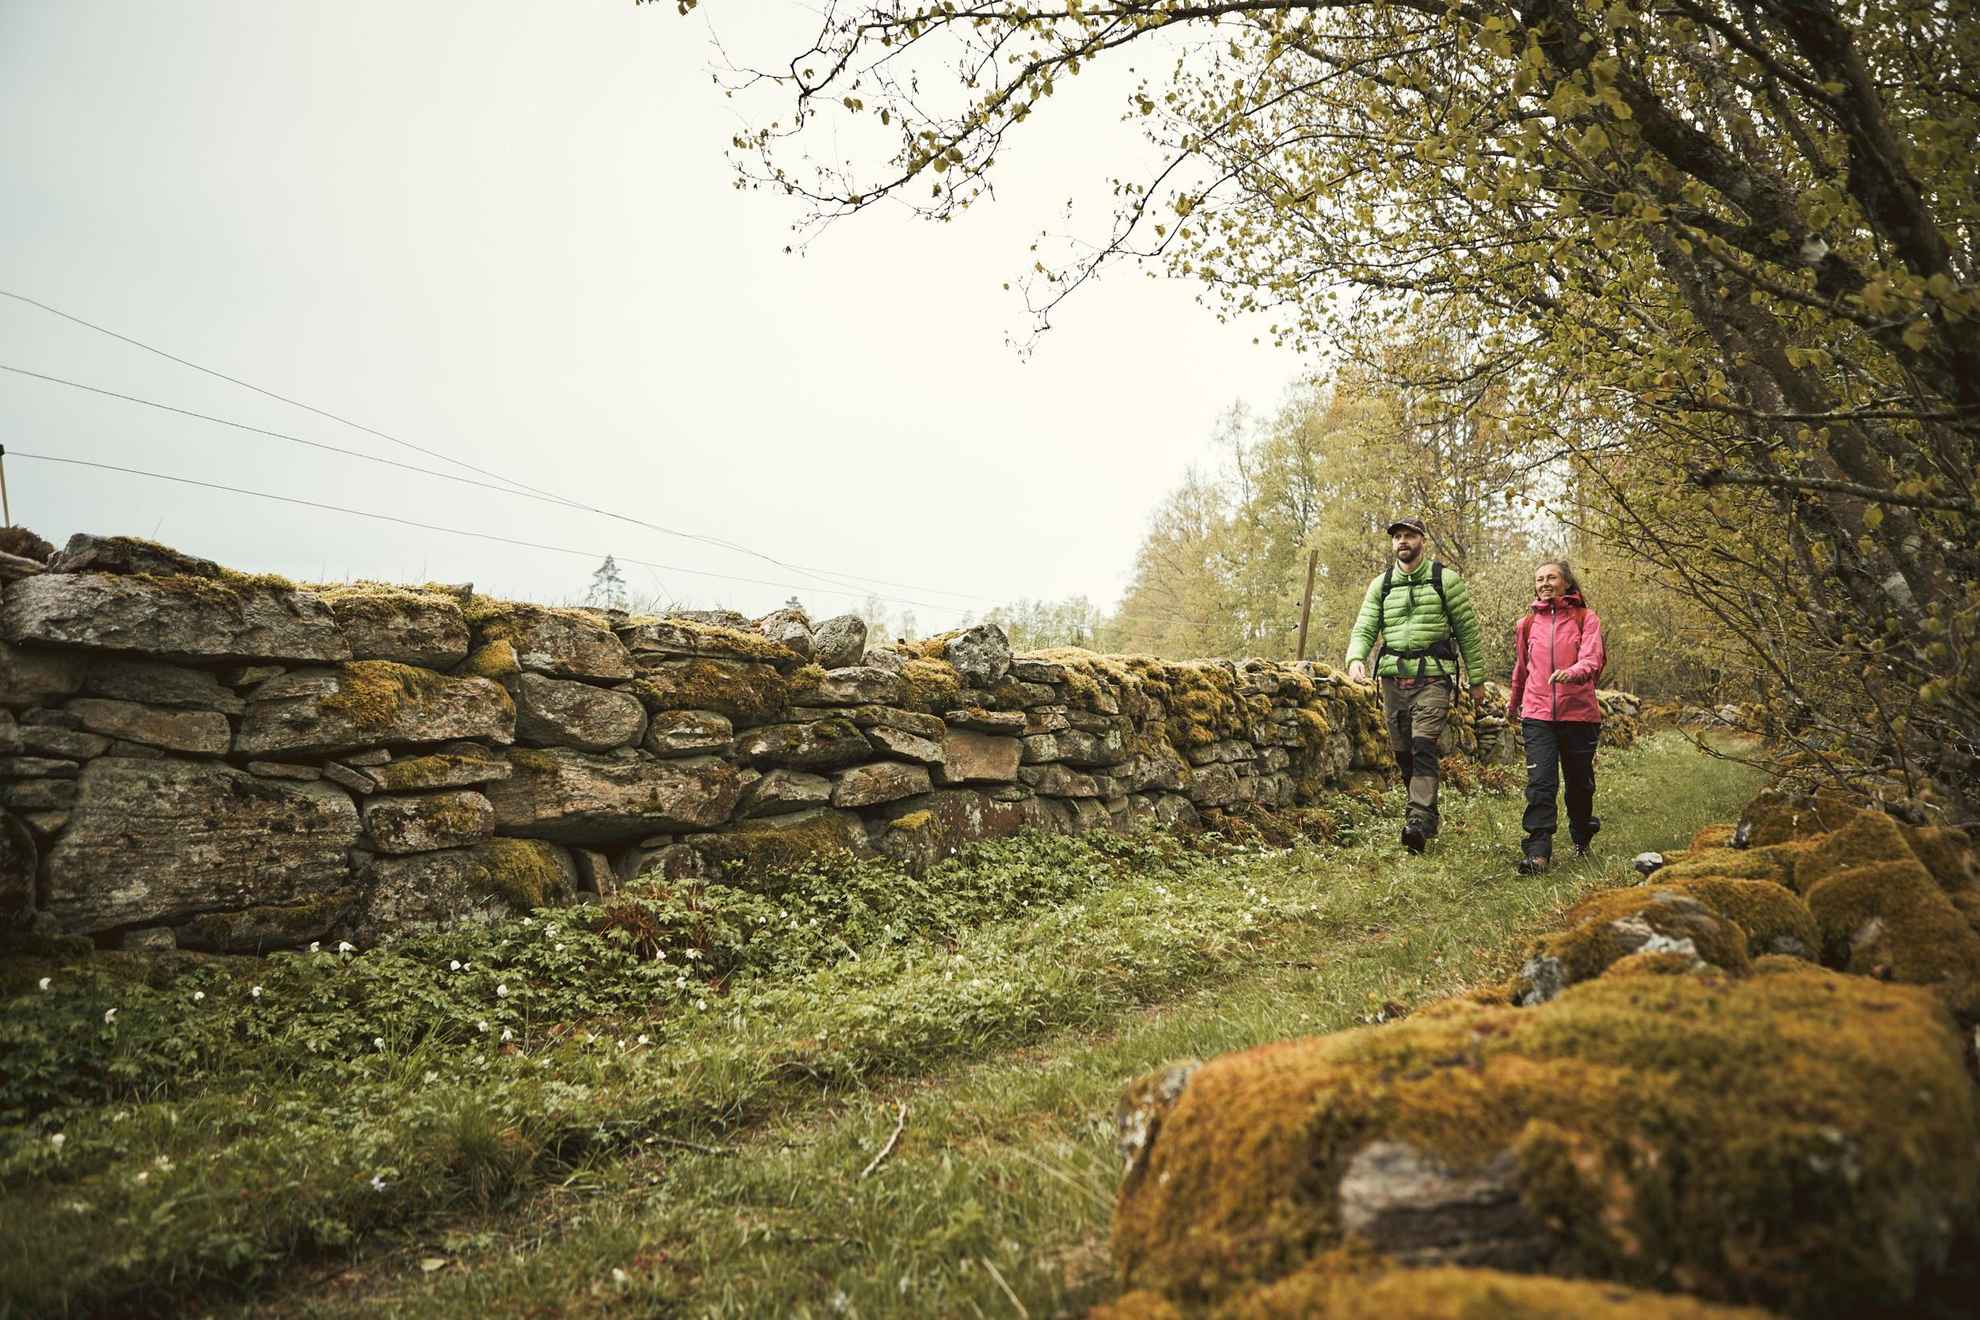 A man and a woman is hiking on a trail next to a stone wall and a forest on the other side.